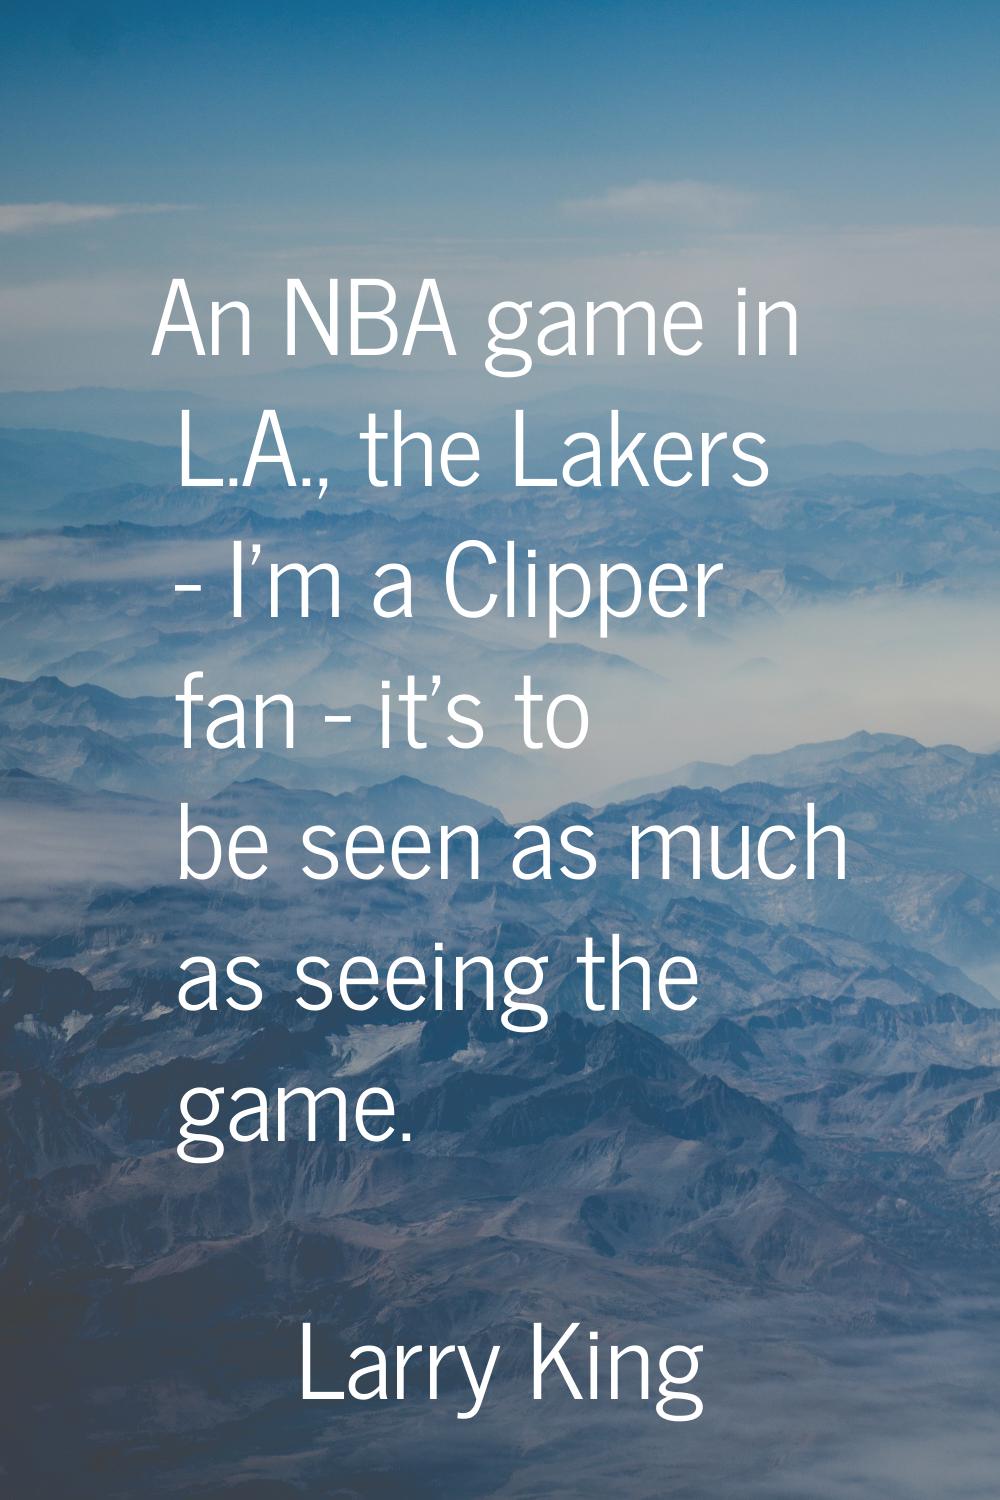 An NBA game in L.A., the Lakers - I'm a Clipper fan - it's to be seen as much as seeing the game.